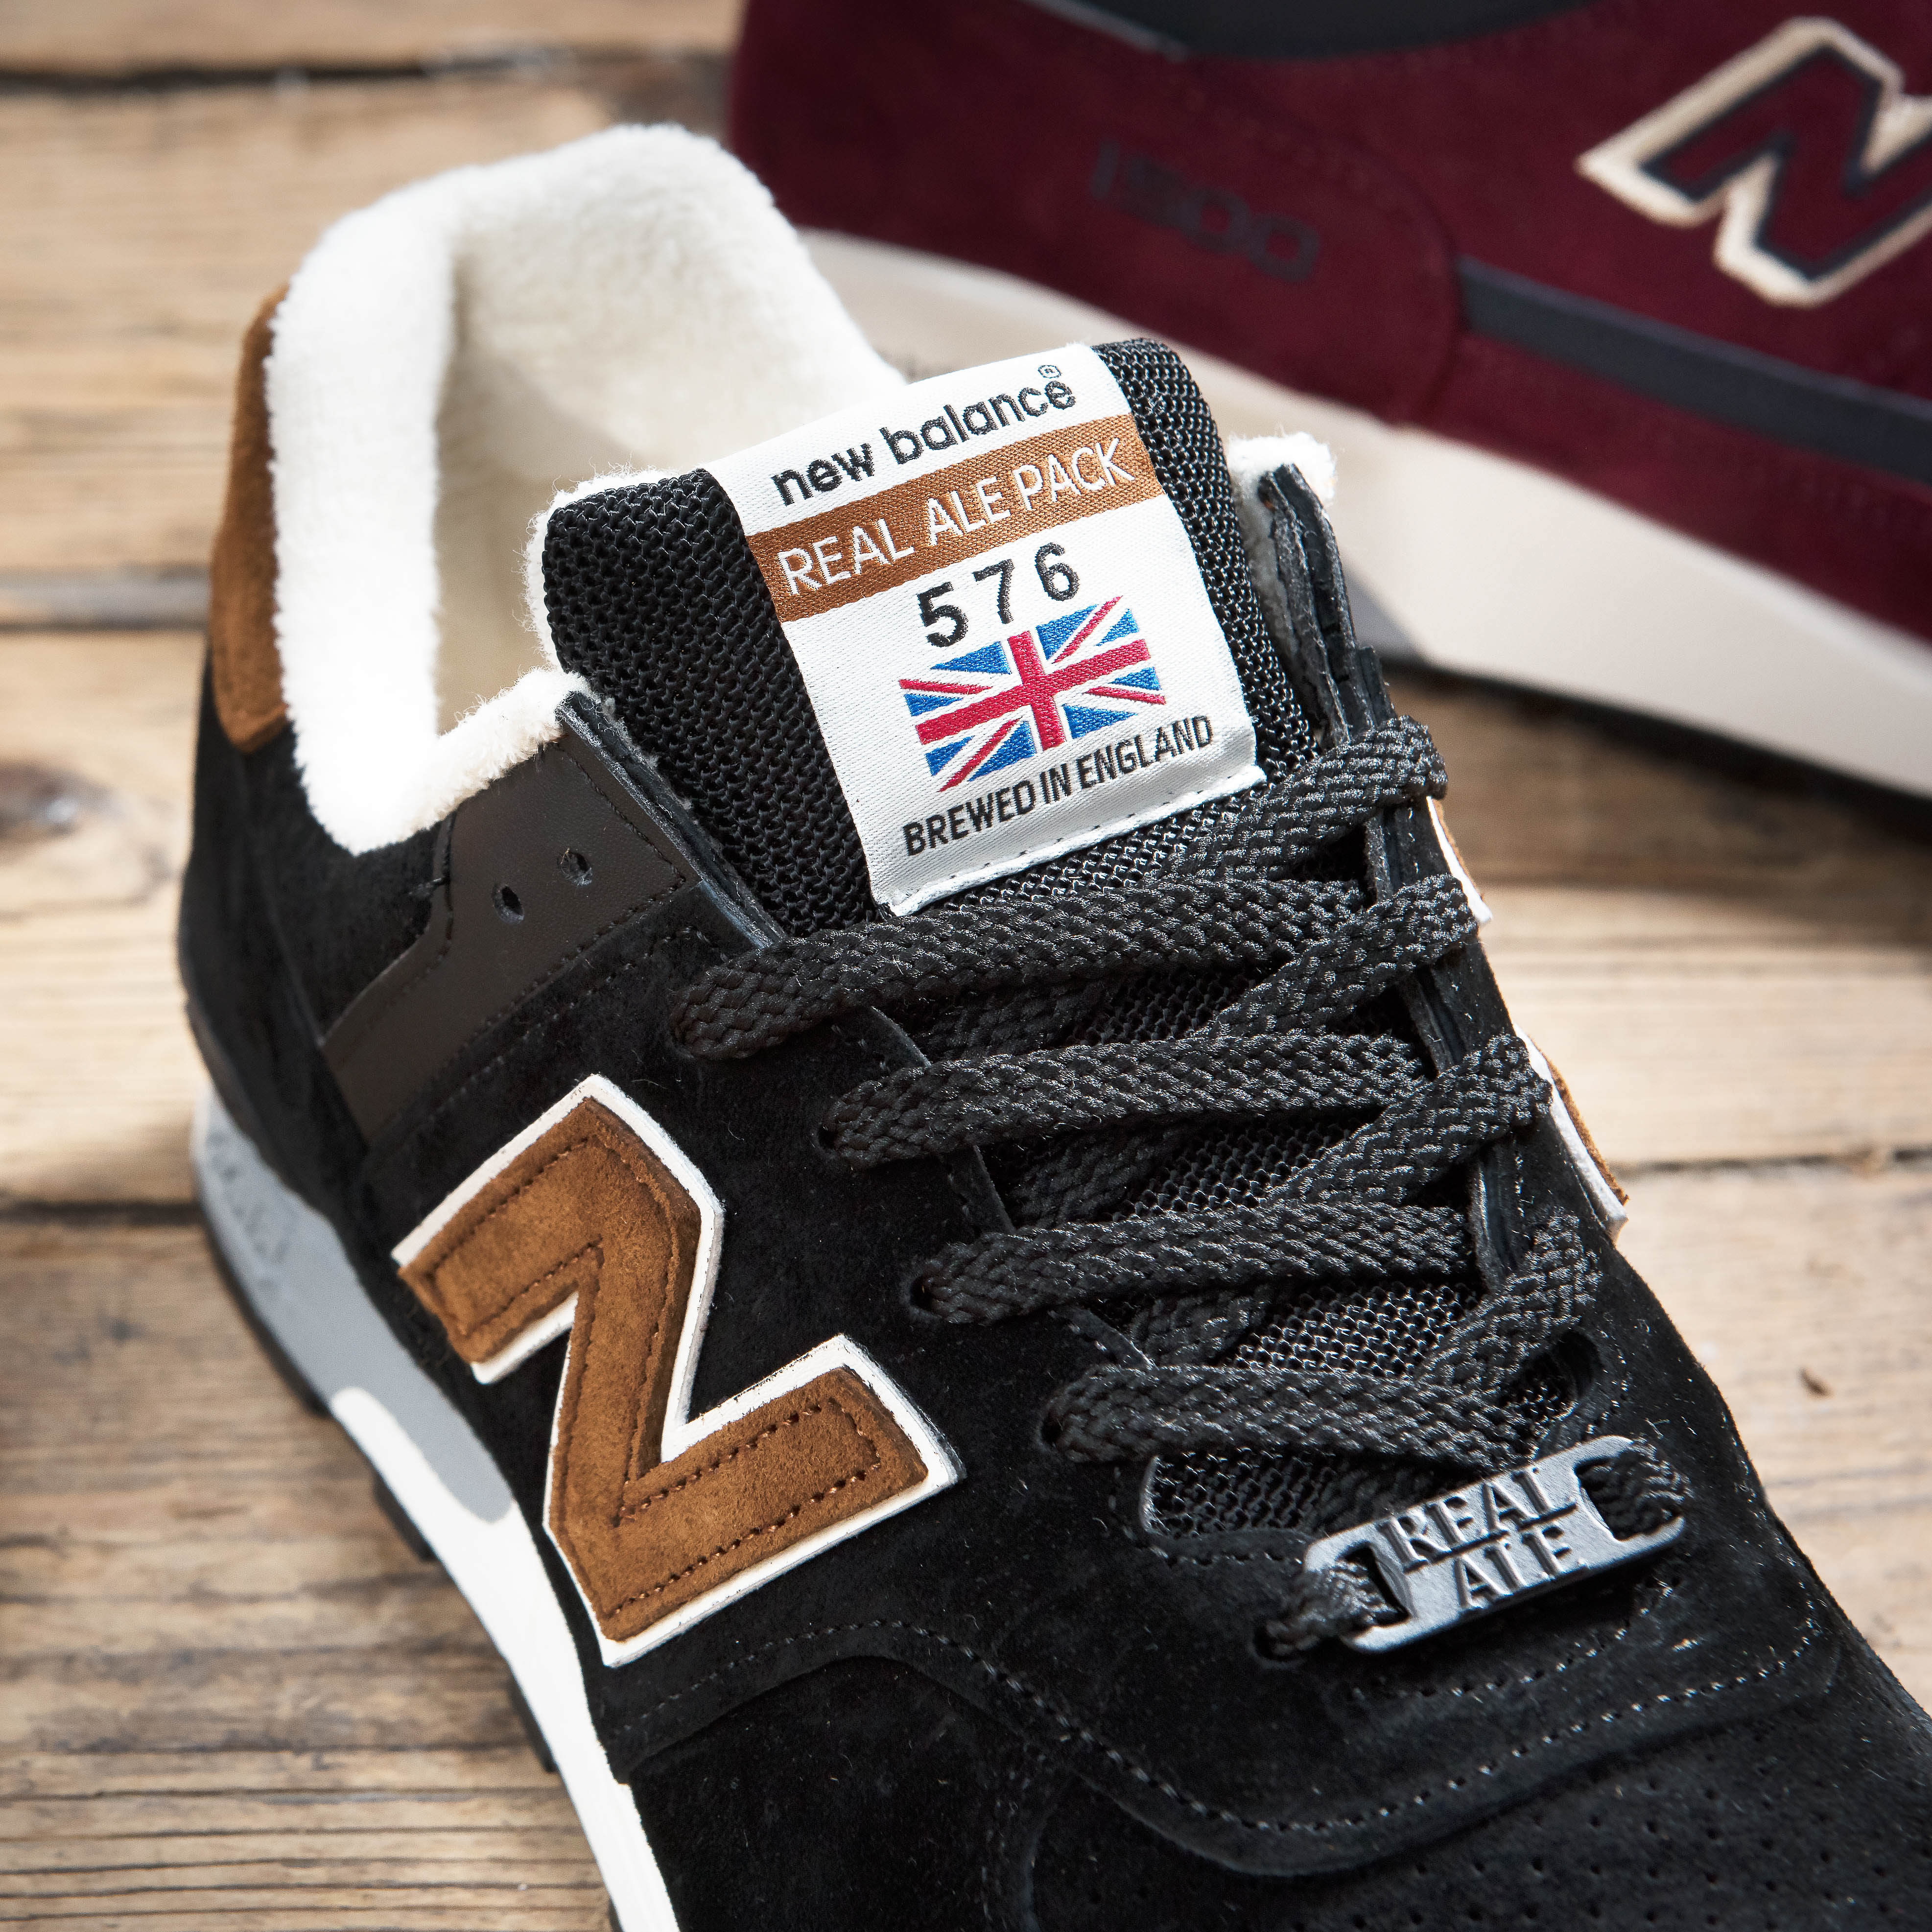 New Balance “Real Ale” Pack | New 